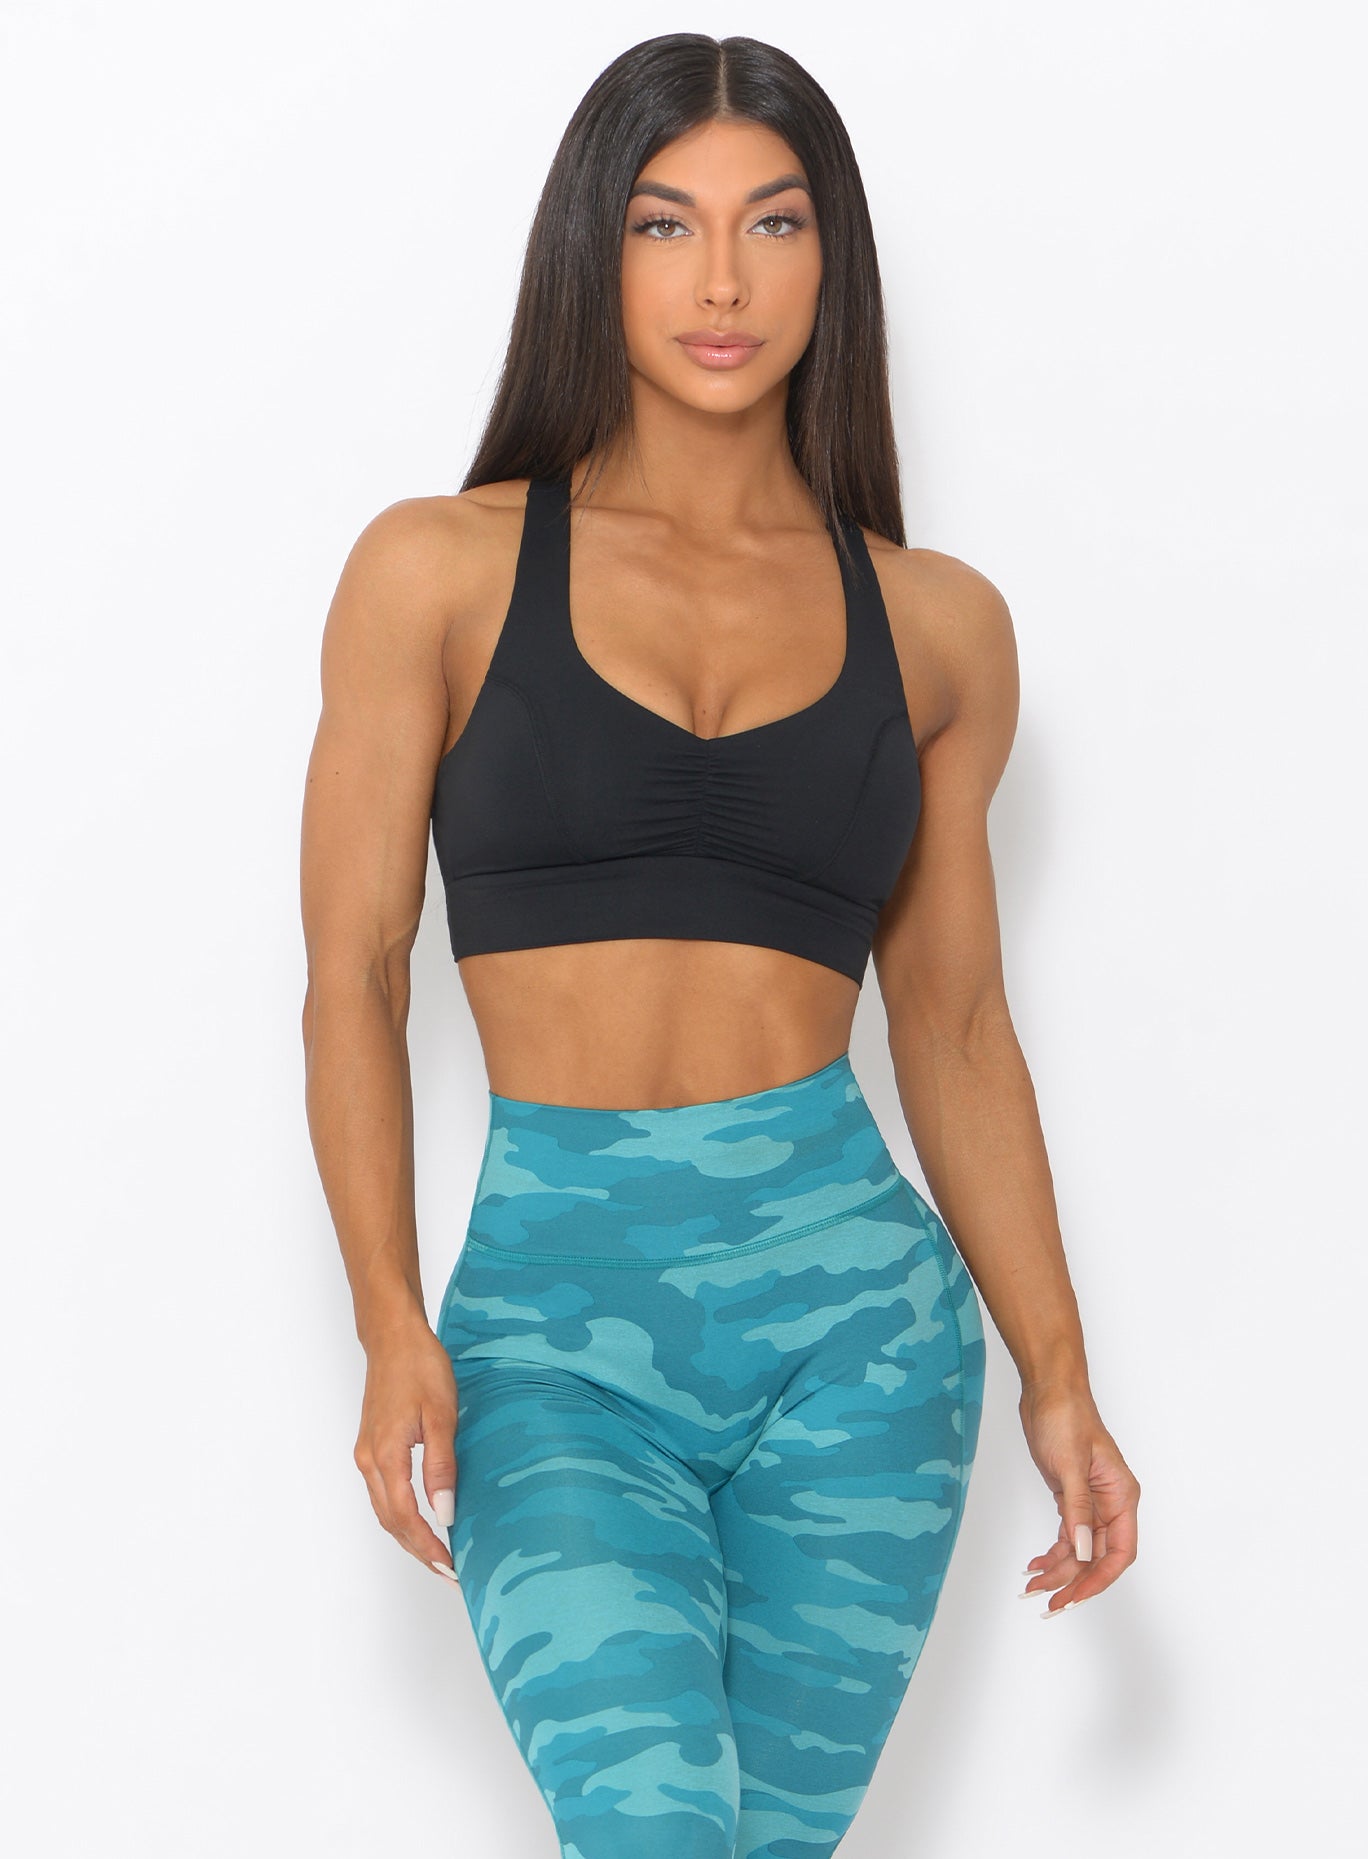 Front view of the model wearing our black mood sports bra and a high waist thigh high in teal color 